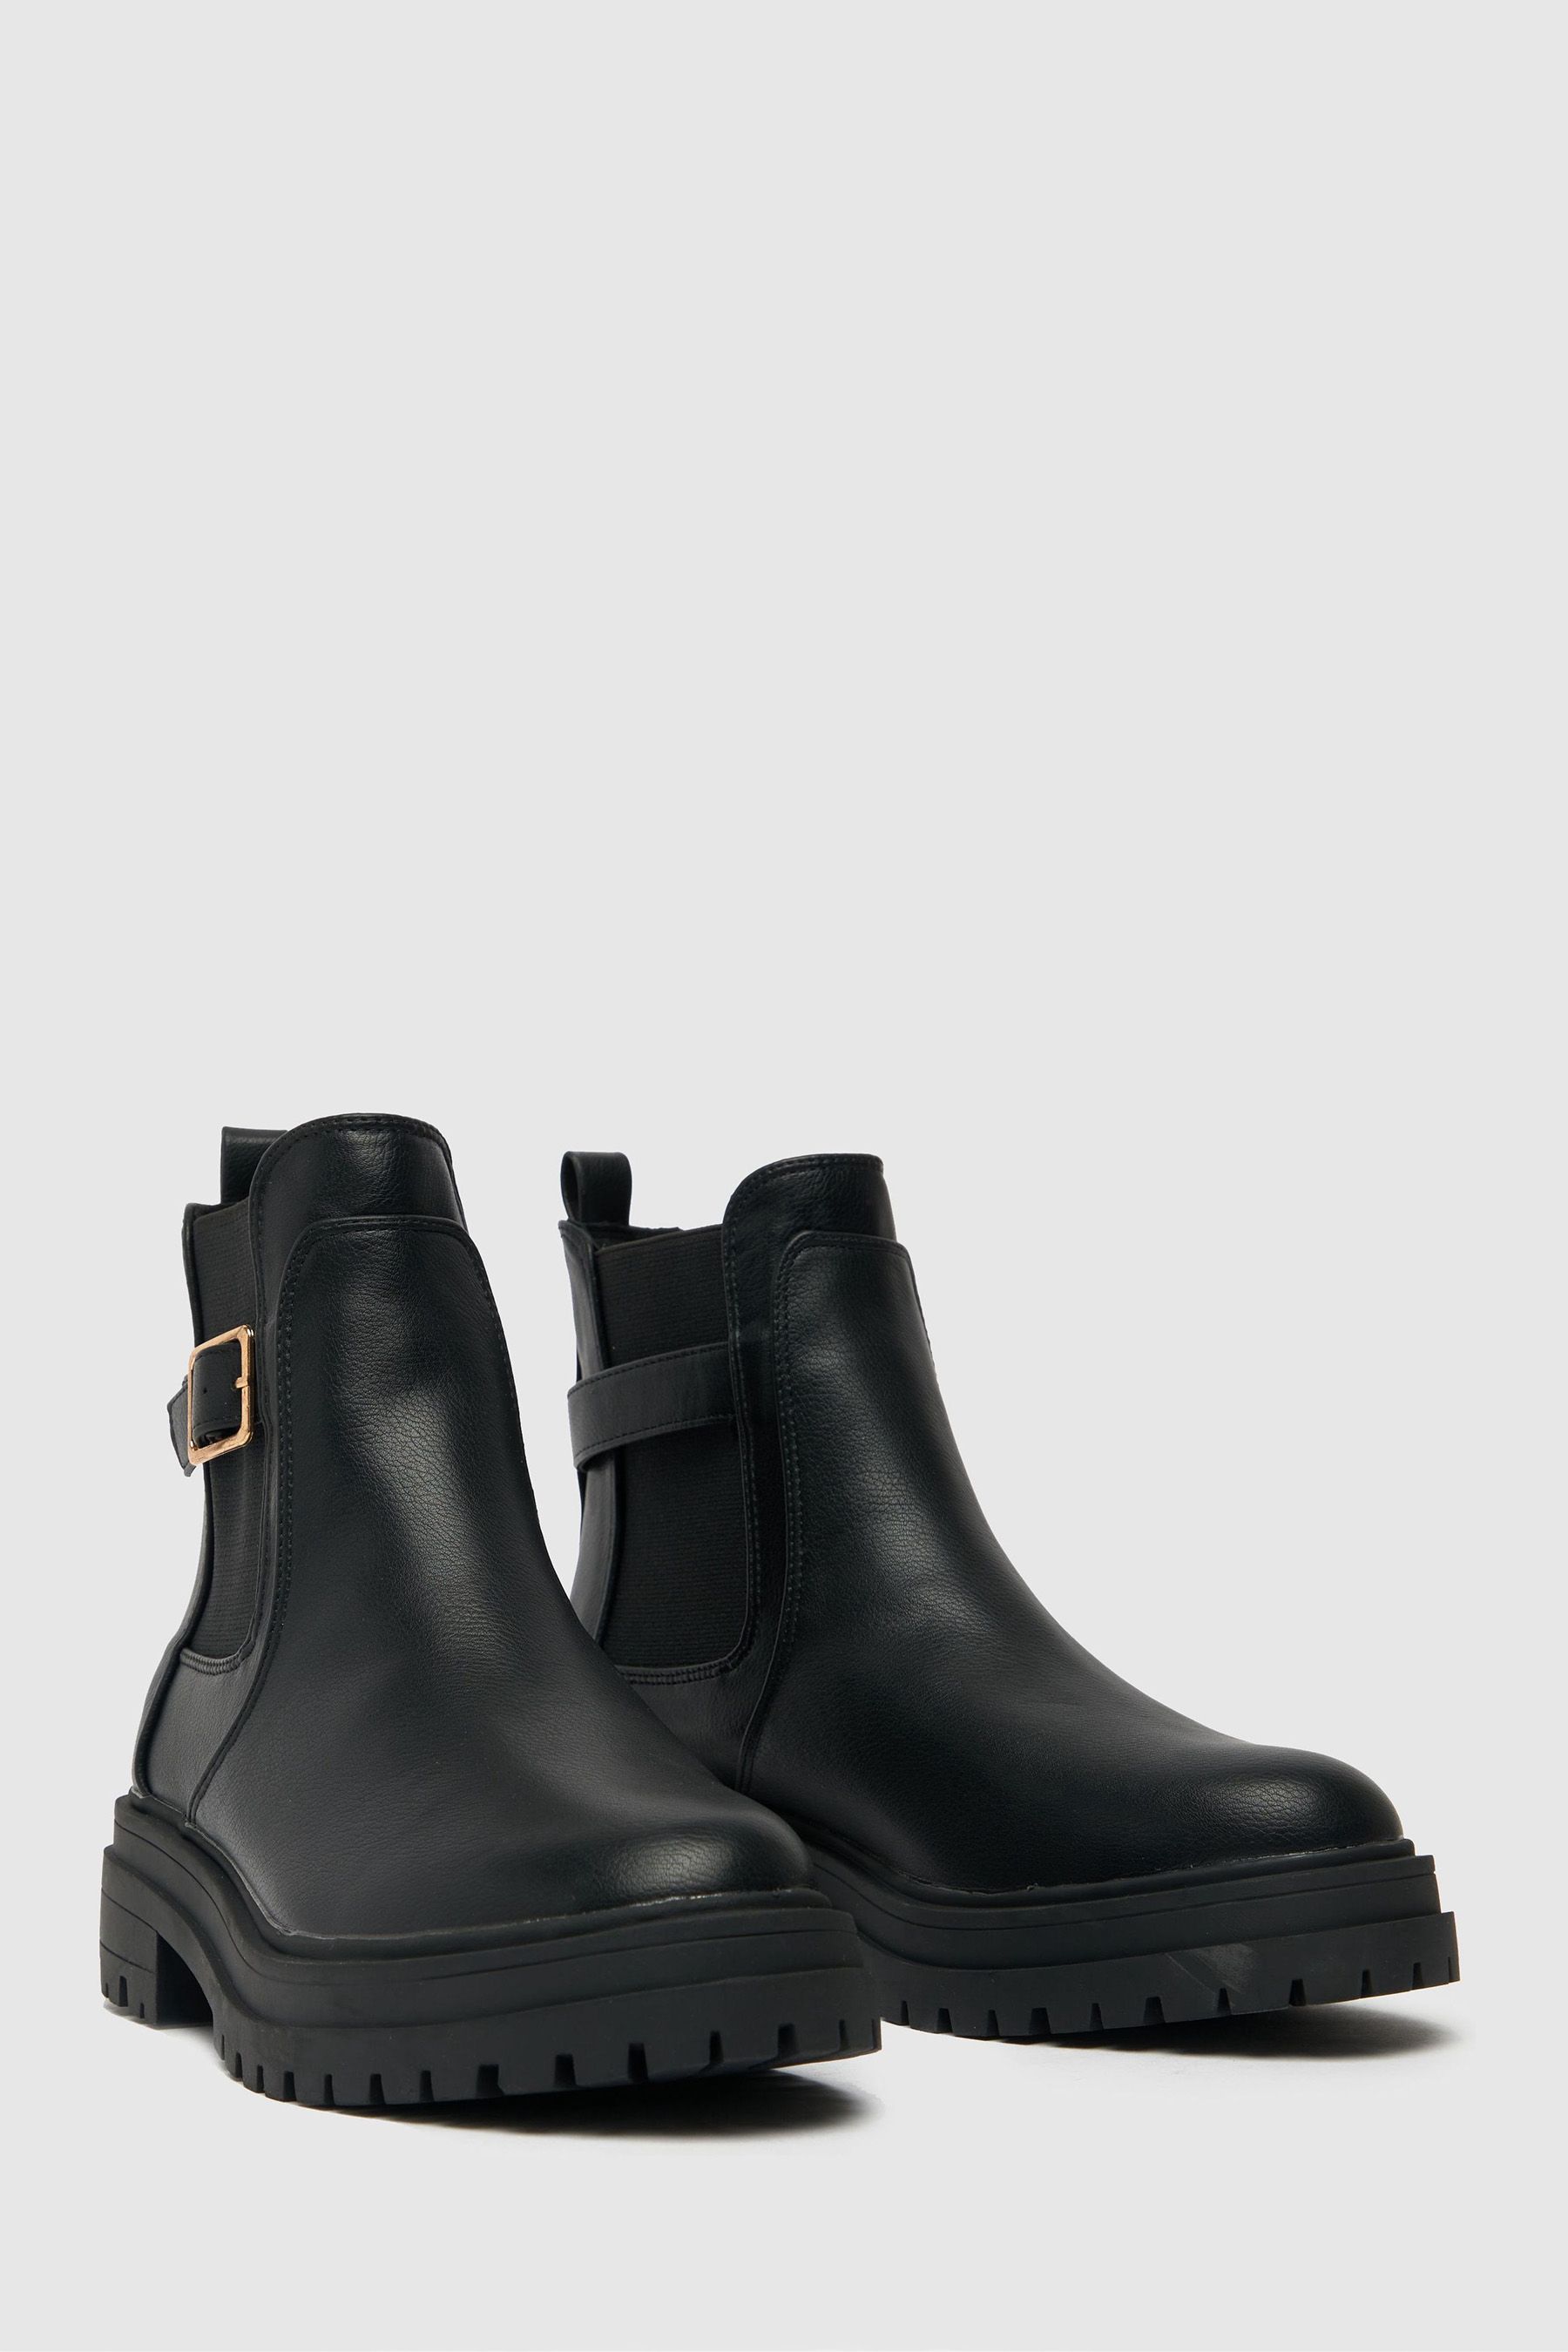 Buy Schuh Ava Chunky Buckle Black Boots from the Next UK online shop